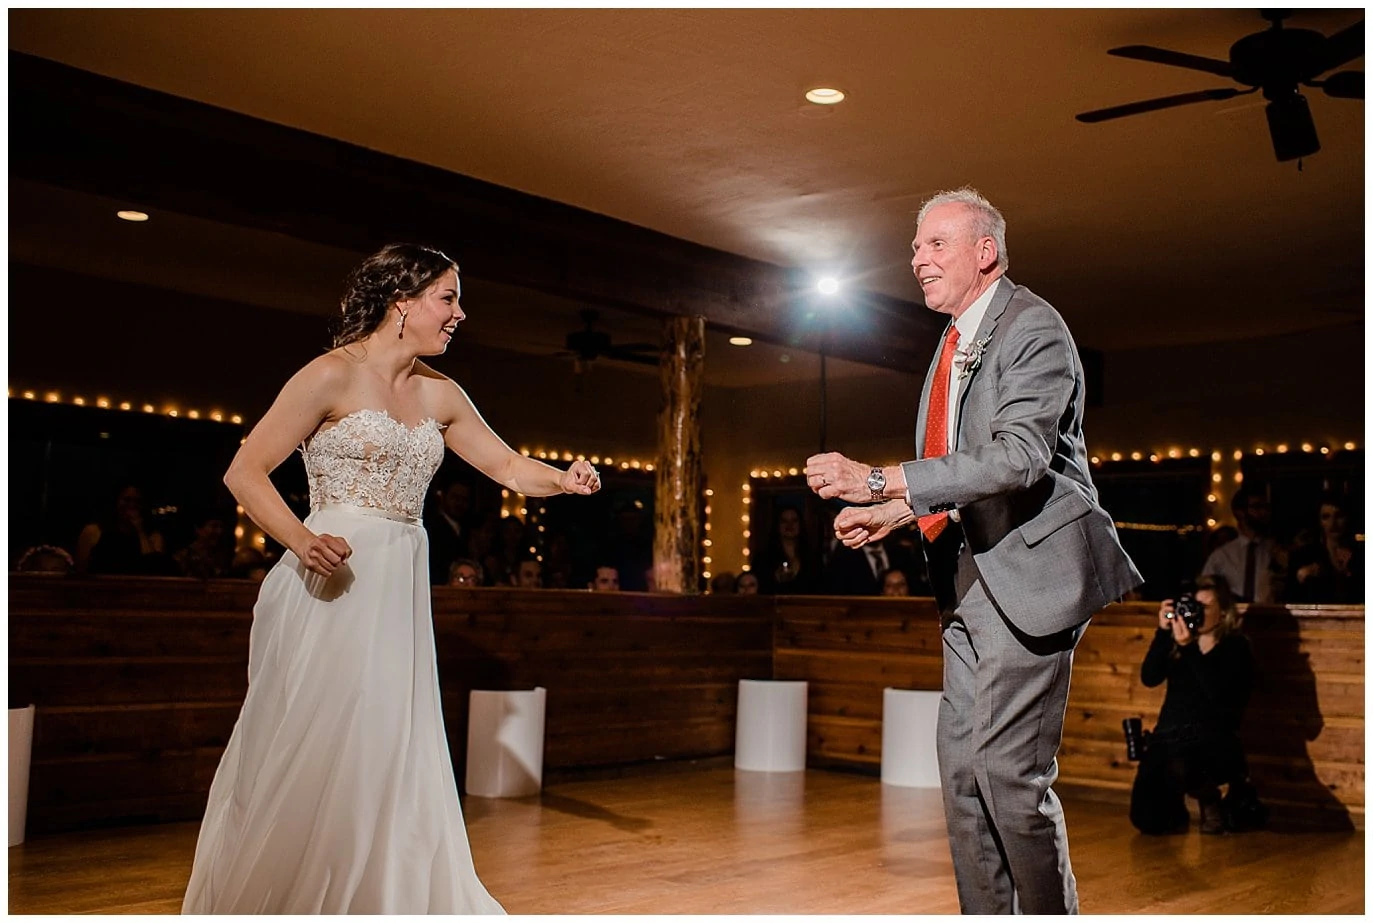 father daughter fast dance at mountain wedding reception photo